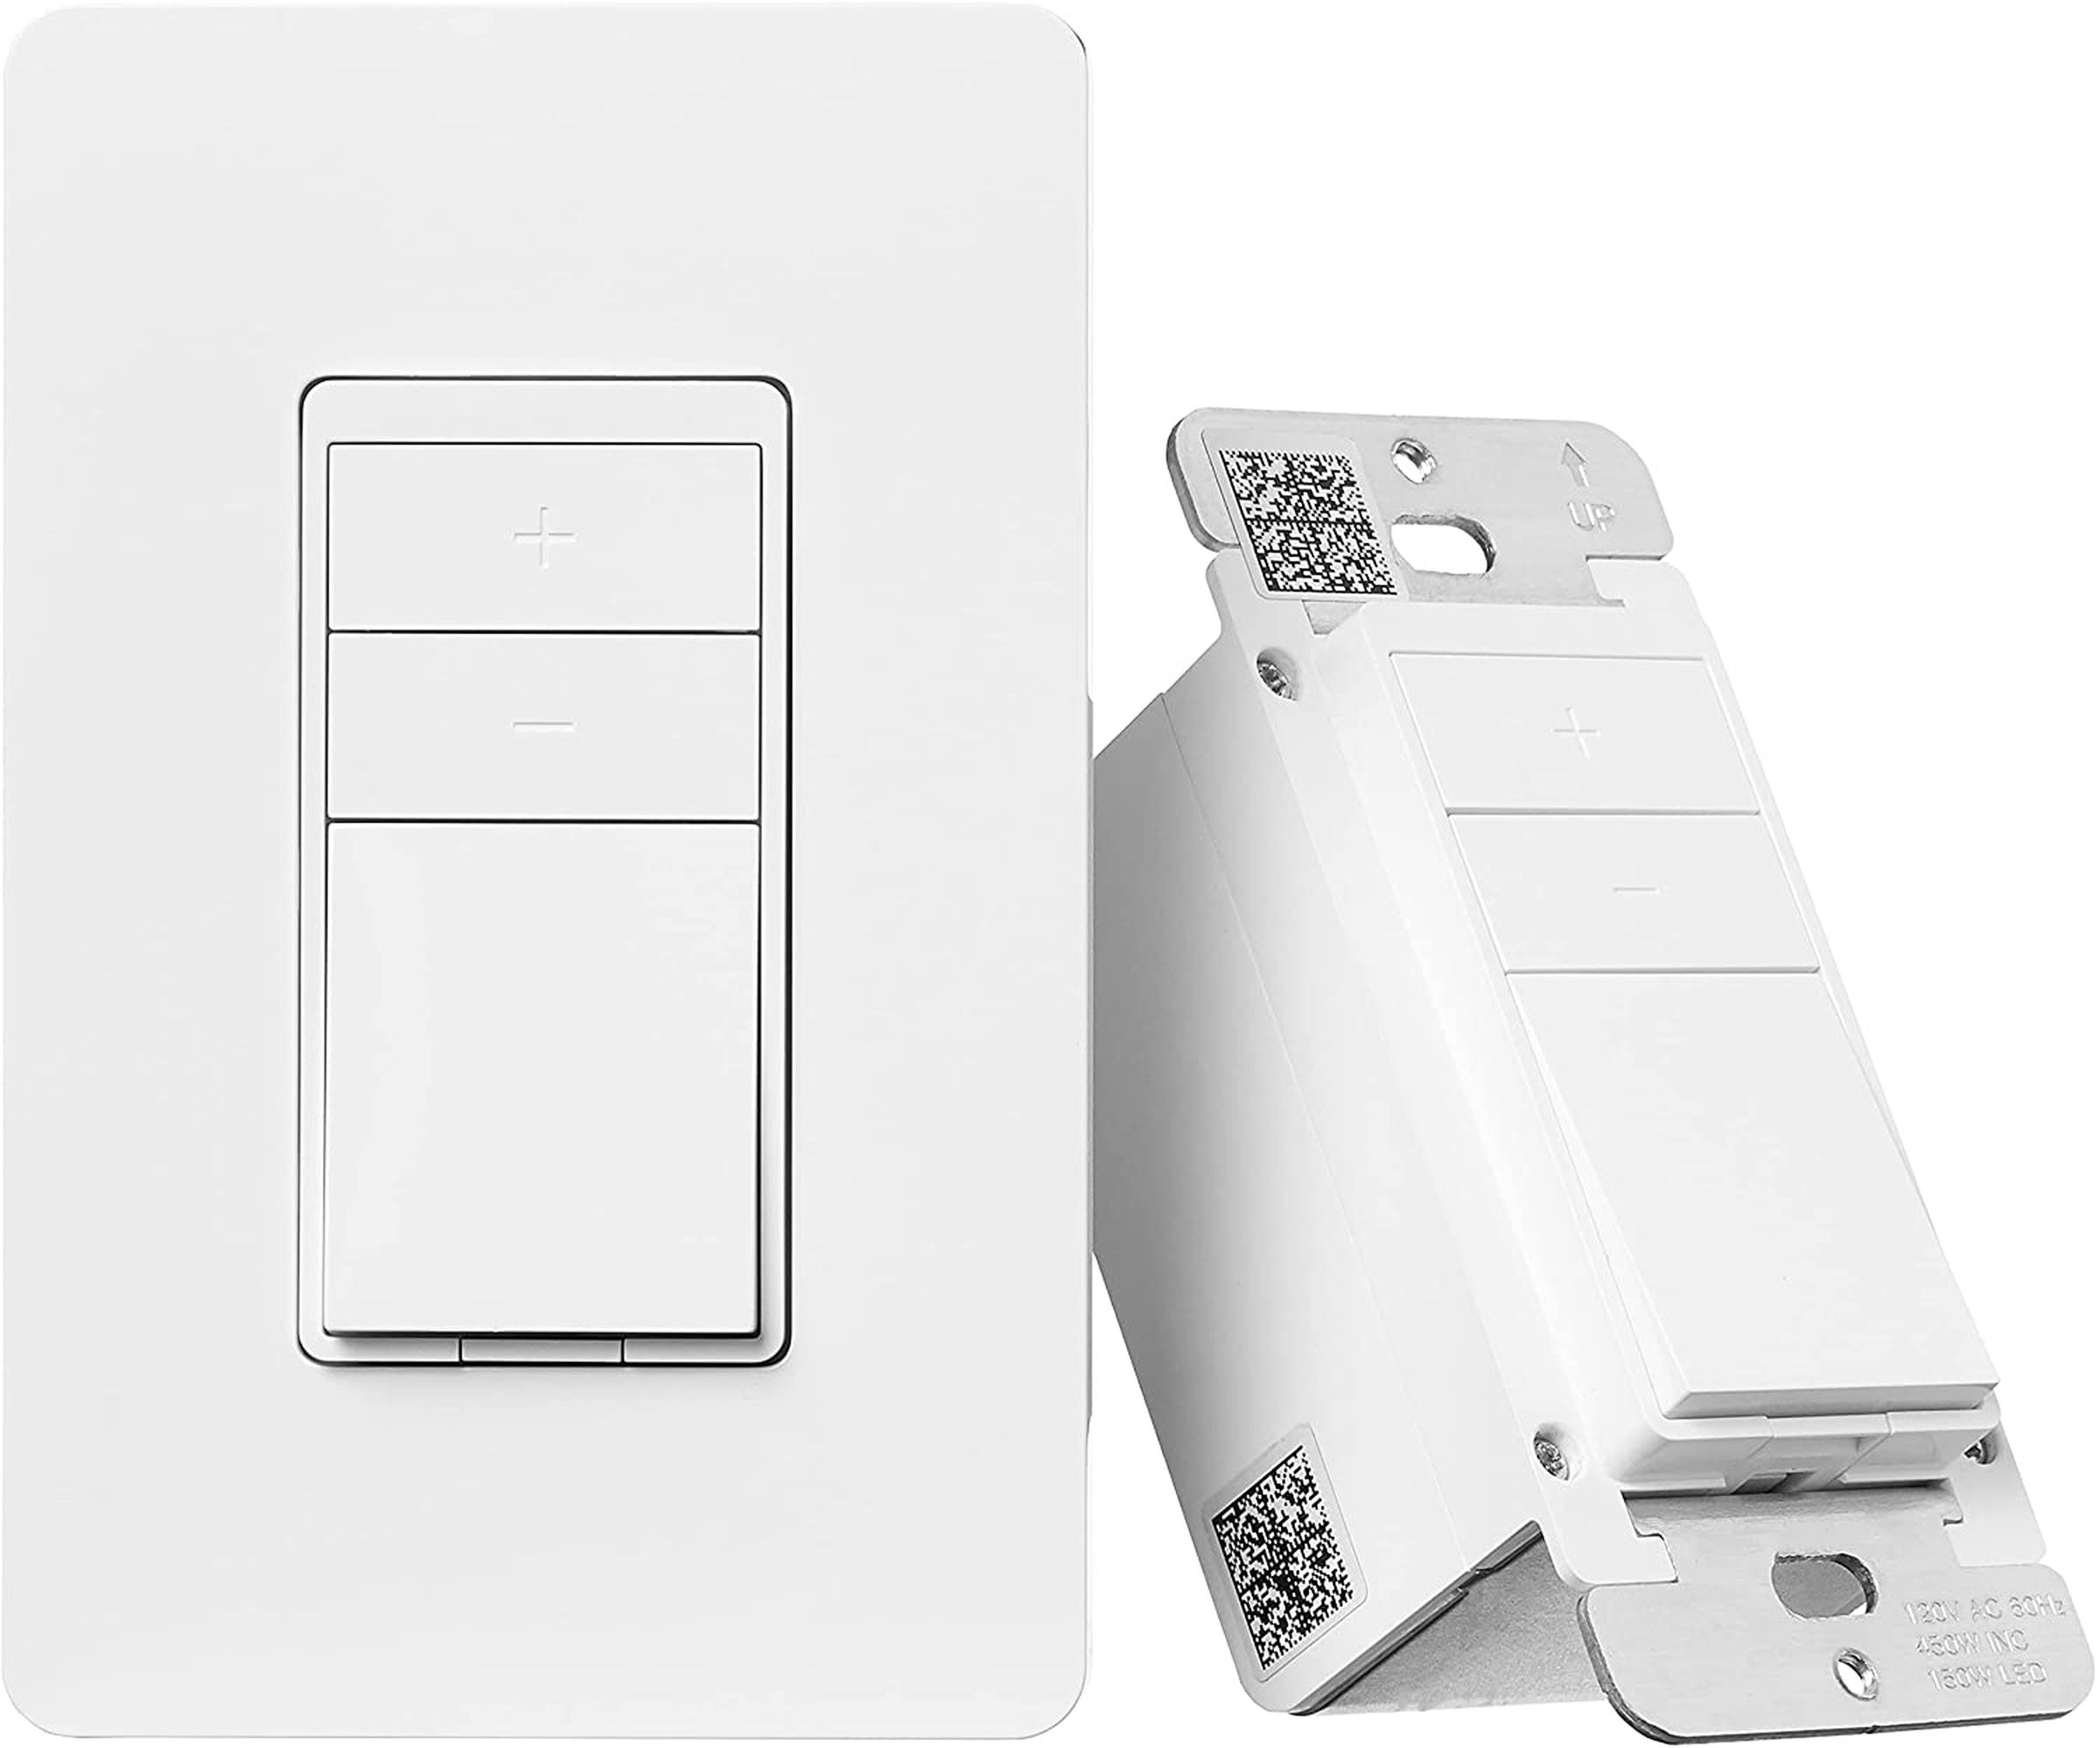 The new Amazon Basics 3-Way Smart Dimmer Switch needs a neutral wire.